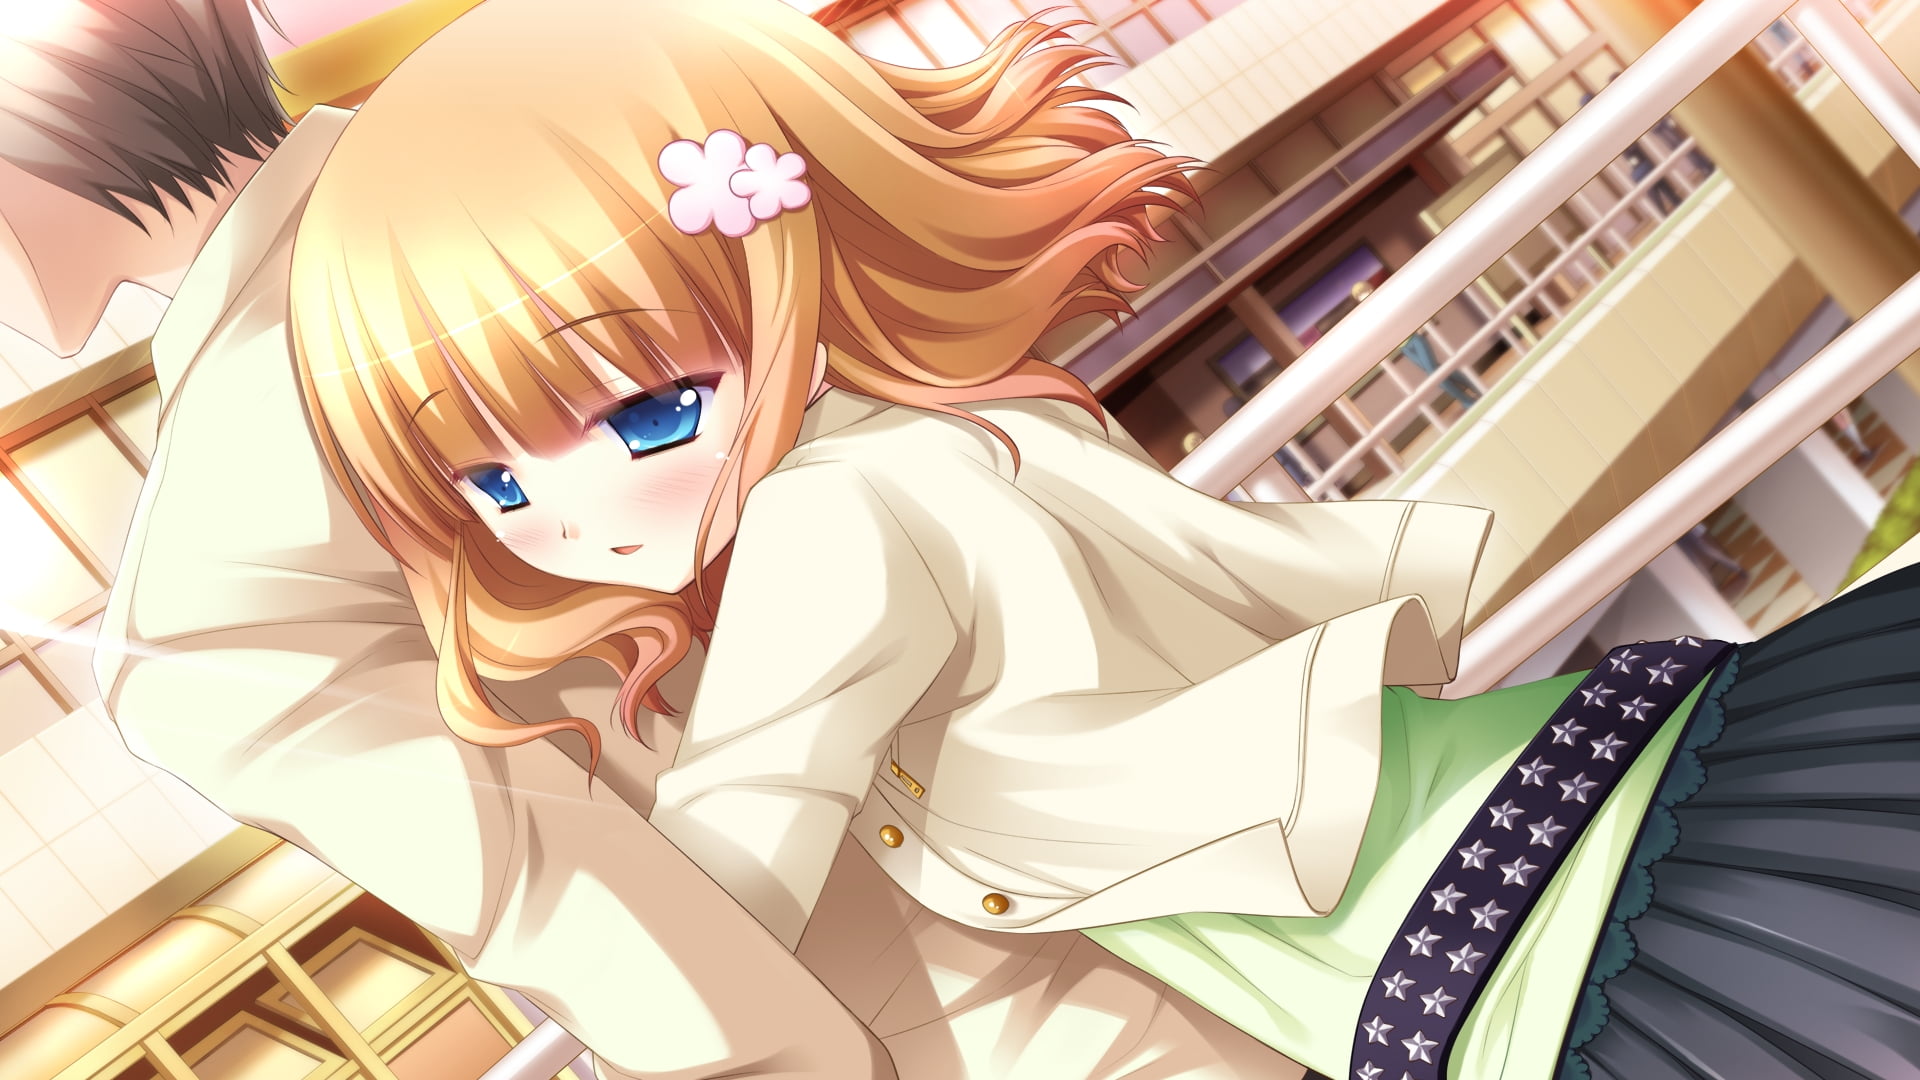 3840x2160 resolution | female anime character with blonde hair ...